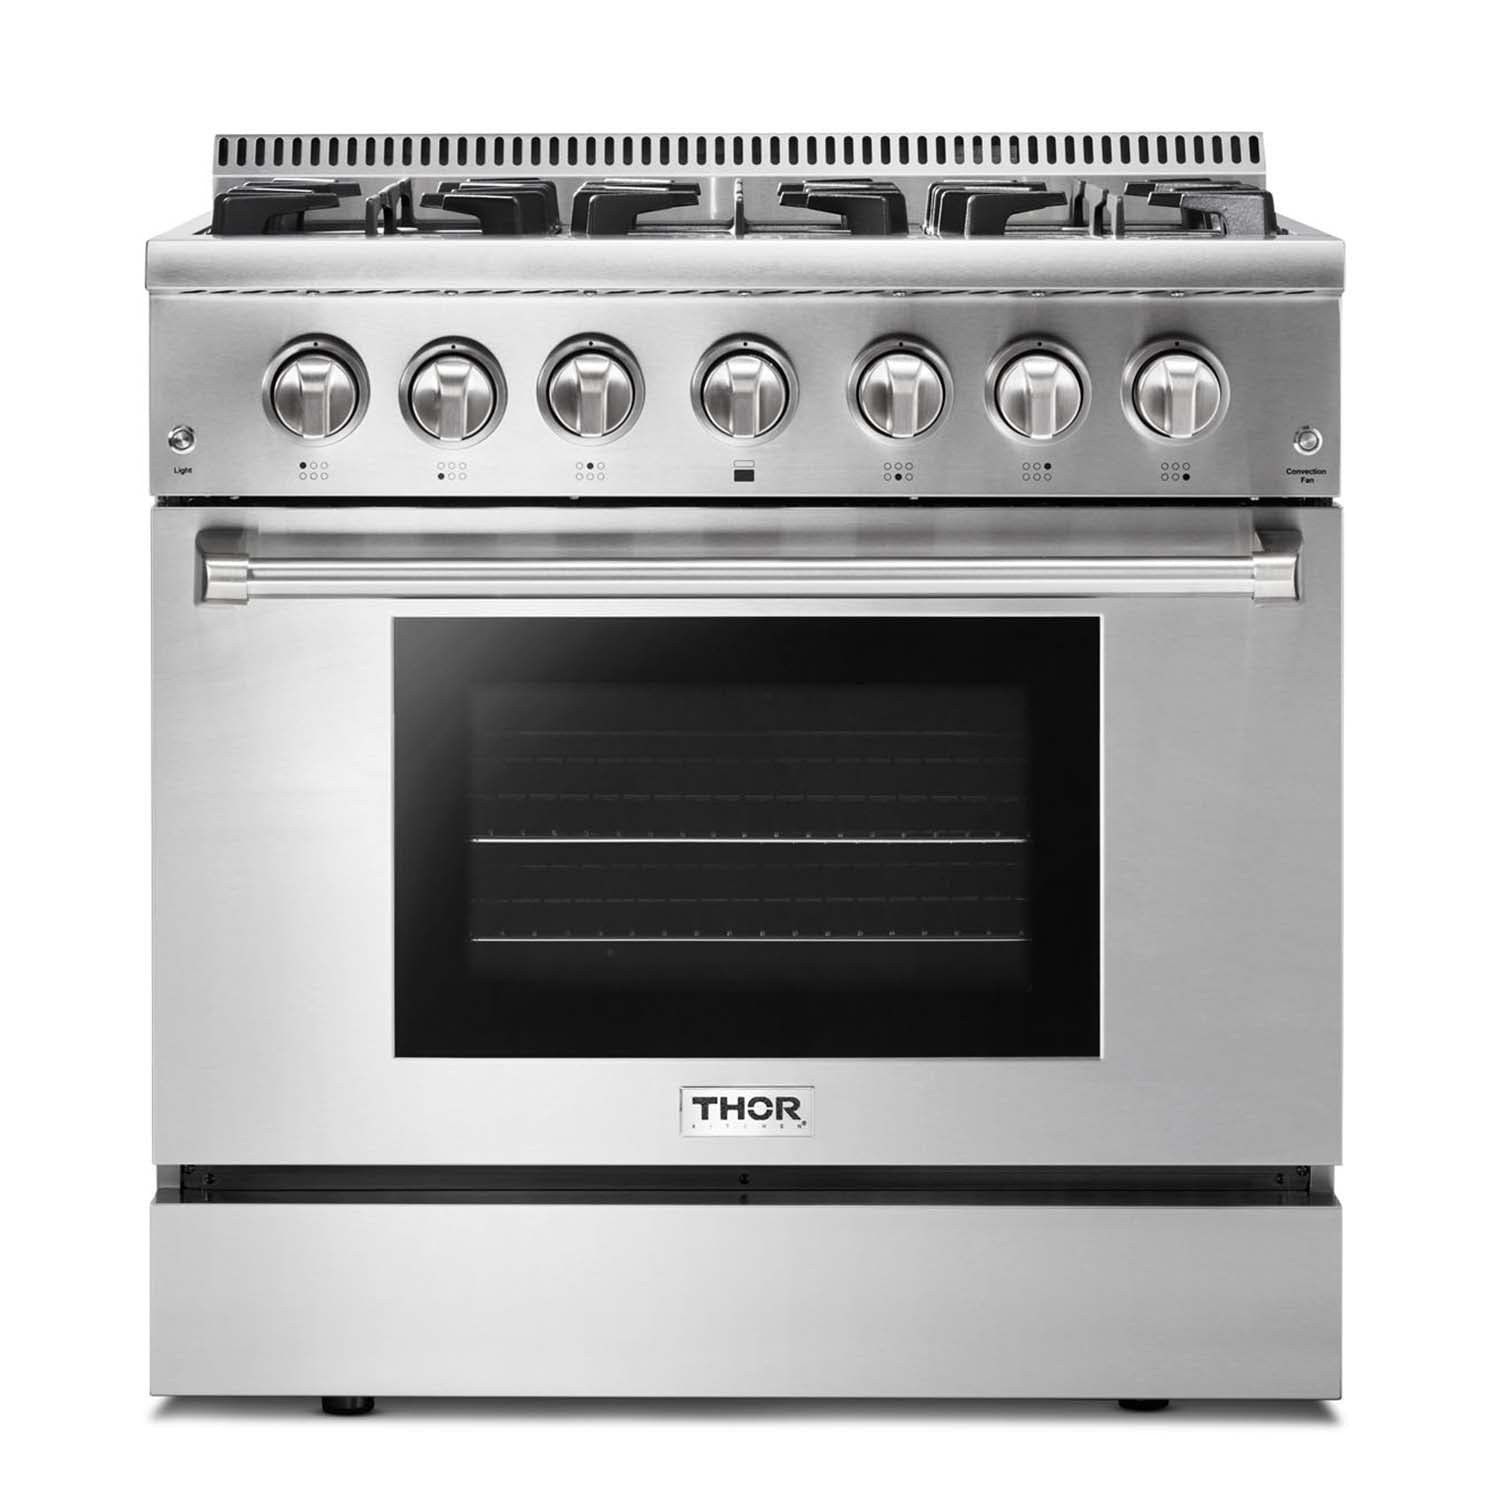 Thor Kitchen 36 Inch Professional Dual Fuel Range in Stainless Steel - HRD3606U